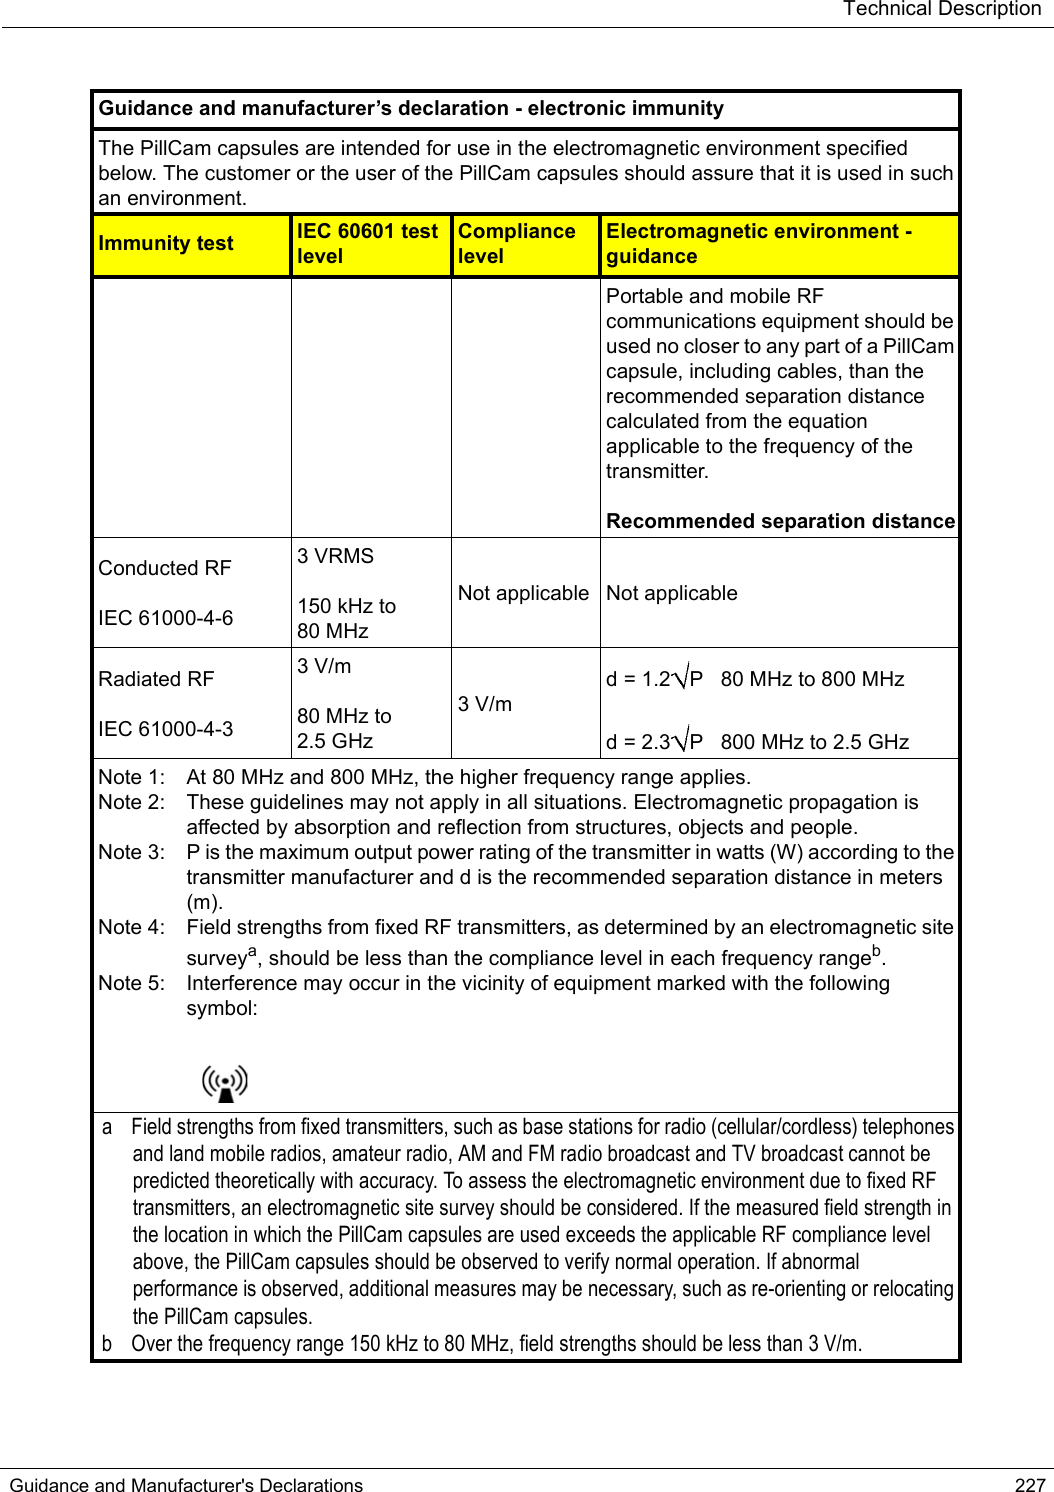 Technical DescriptionGuidance and Manufacturer&apos;s Declarations 227Guidance and manufacturer’s declaration - electronic immunityThe PillCam capsules are intended for use in the electromagnetic environment specified below. The customer or the user of the PillCam capsules should assure that it is used in such an environment.Immunity test IEC 60601 test levelCompliance levelElectromagnetic environment - guidancePortable and mobile RF communications equipment should be used no closer to any part of a PillCam capsule, including cables, than the recommended separation distance calculated from the equation applicable to the frequency of the transmitter.Recommended separation distanceConducted RFIEC 61000-4-63 VRMS150 kHz to80 MHzNot applicable Not applicableRadiated RFIEC 61000-4-33 V/m80 MHz to2.5 GHz3 V/md = 1.2 P   80 MHz to 800 MHzd = 2.3 P   800 MHz to 2.5 GHzNote 1: At 80 MHz and 800 MHz, the higher frequency range applies.Note 2: These guidelines may not apply in all situations. Electromagnetic propagation is affected by absorption and reflection from structures, objects and people.Note 3: P is the maximum output power rating of the transmitter in watts (W) according to the transmitter manufacturer and d is the recommended separation distance in meters (m). Note 4: Field strengths from fixed RF transmitters, as determined by an electromagnetic site surveya, should be less than the compliance level in each frequency rangeb.Note 5: Interference may occur in the vicinity of equipment marked with the following symbol: a Field strengths from fixed transmitters, such as base stations for radio (cellular/cordless) telephones and land mobile radios, amateur radio, AM and FM radio broadcast and TV broadcast cannot be predicted theoretically with accuracy. To assess the electromagnetic environment due to fixed RF transmitters, an electromagnetic site survey should be considered. If the measured field strength in the location in which the PillCam capsules are used exceeds the applicable RF compliance level above, the PillCam capsules should be observed to verify normal operation. If abnormal performance is observed, additional measures may be necessary, such as re-orienting or relocating the PillCam capsules.b Over the frequency range 150 kHz to 80 MHz, field strengths should be less than 3 V/m.